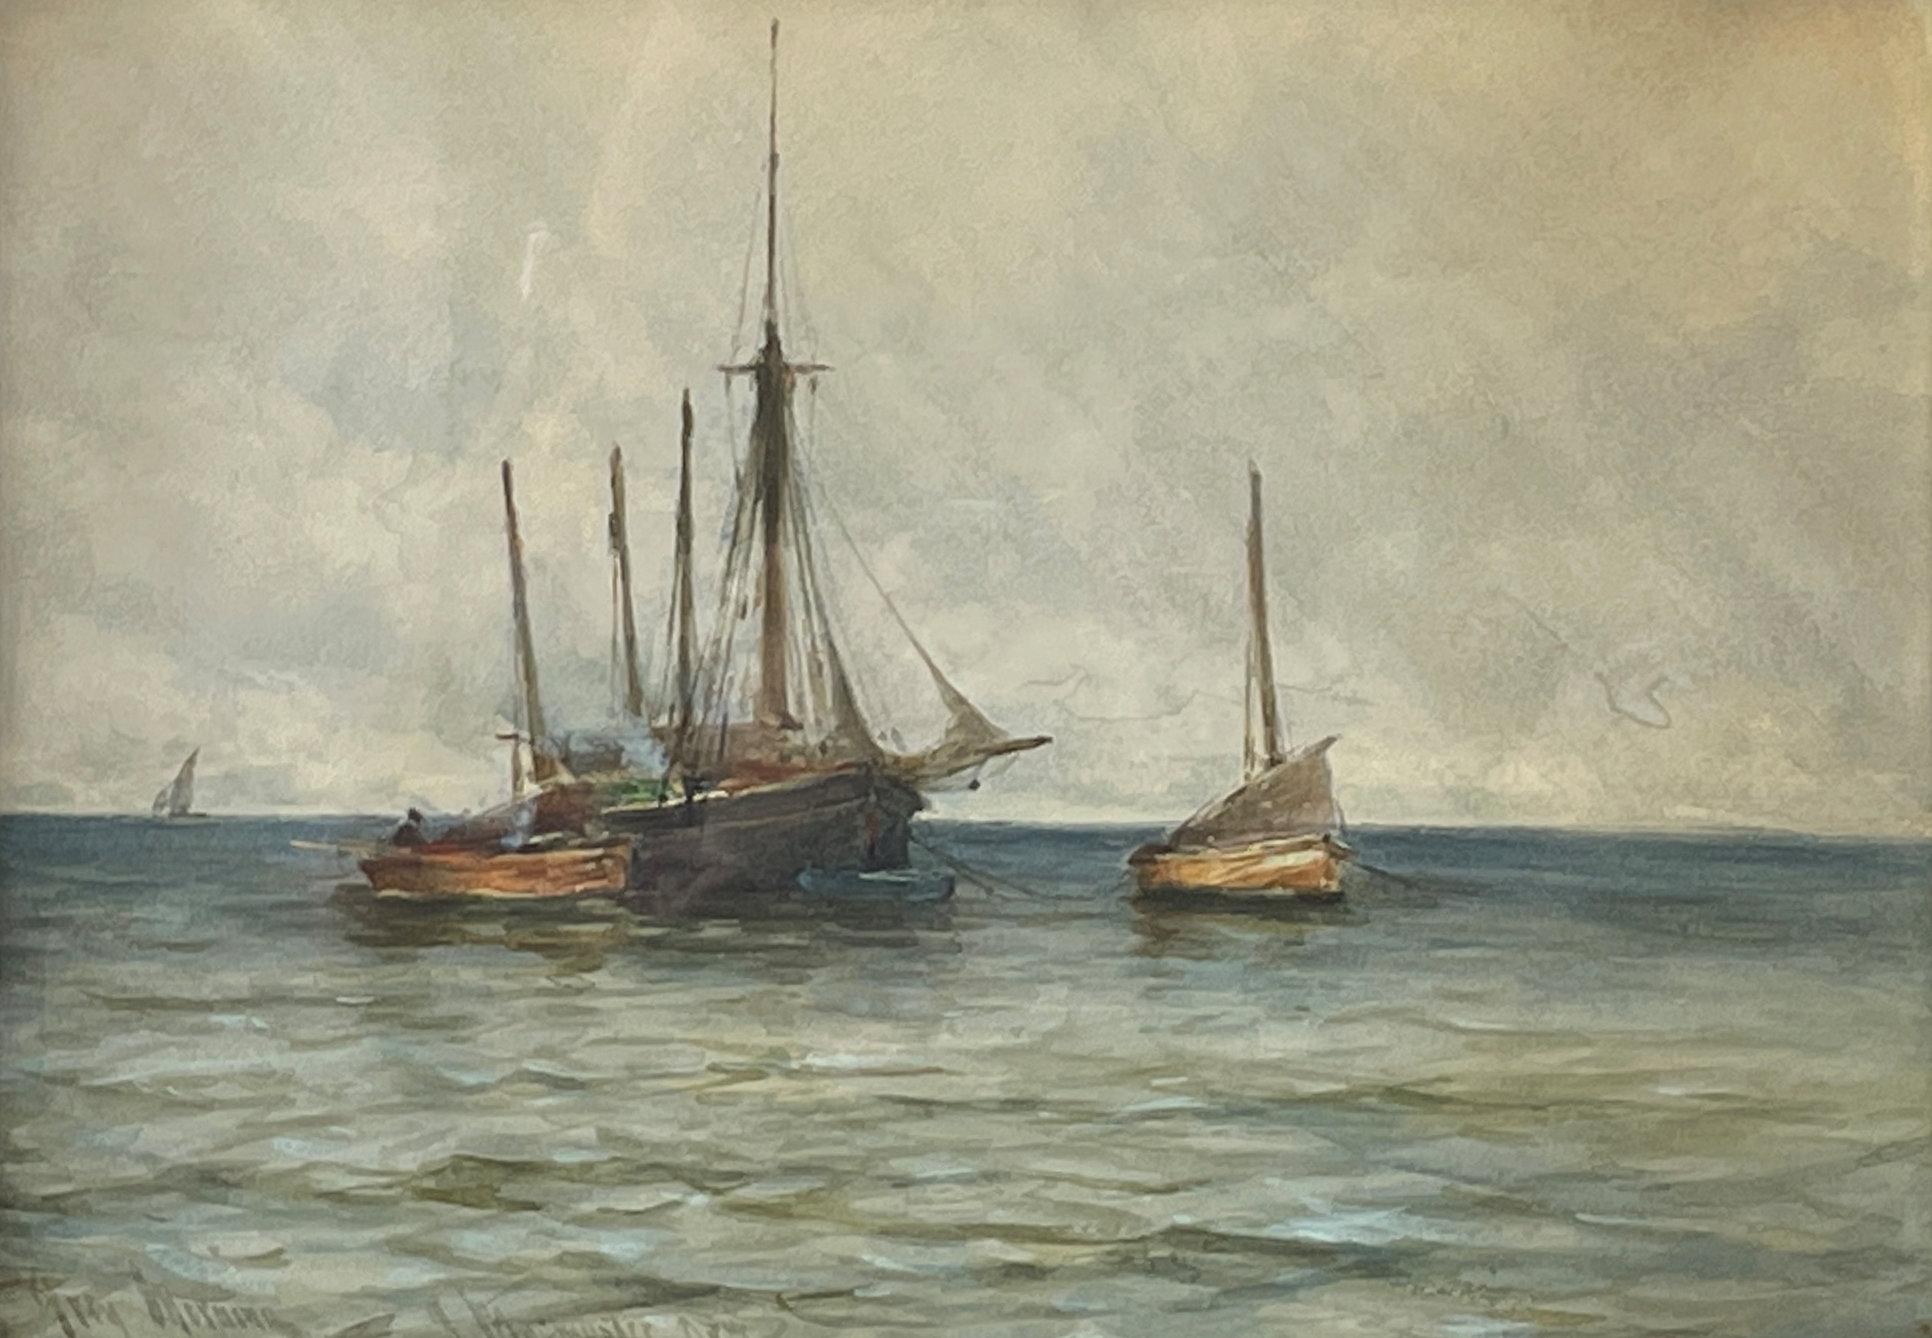 James MacMaster
Irvine Harbour
Signed lower right
Watercolor on paper
10 1/4 x 14 inches

Provenance:
Private Collection, New Jersey